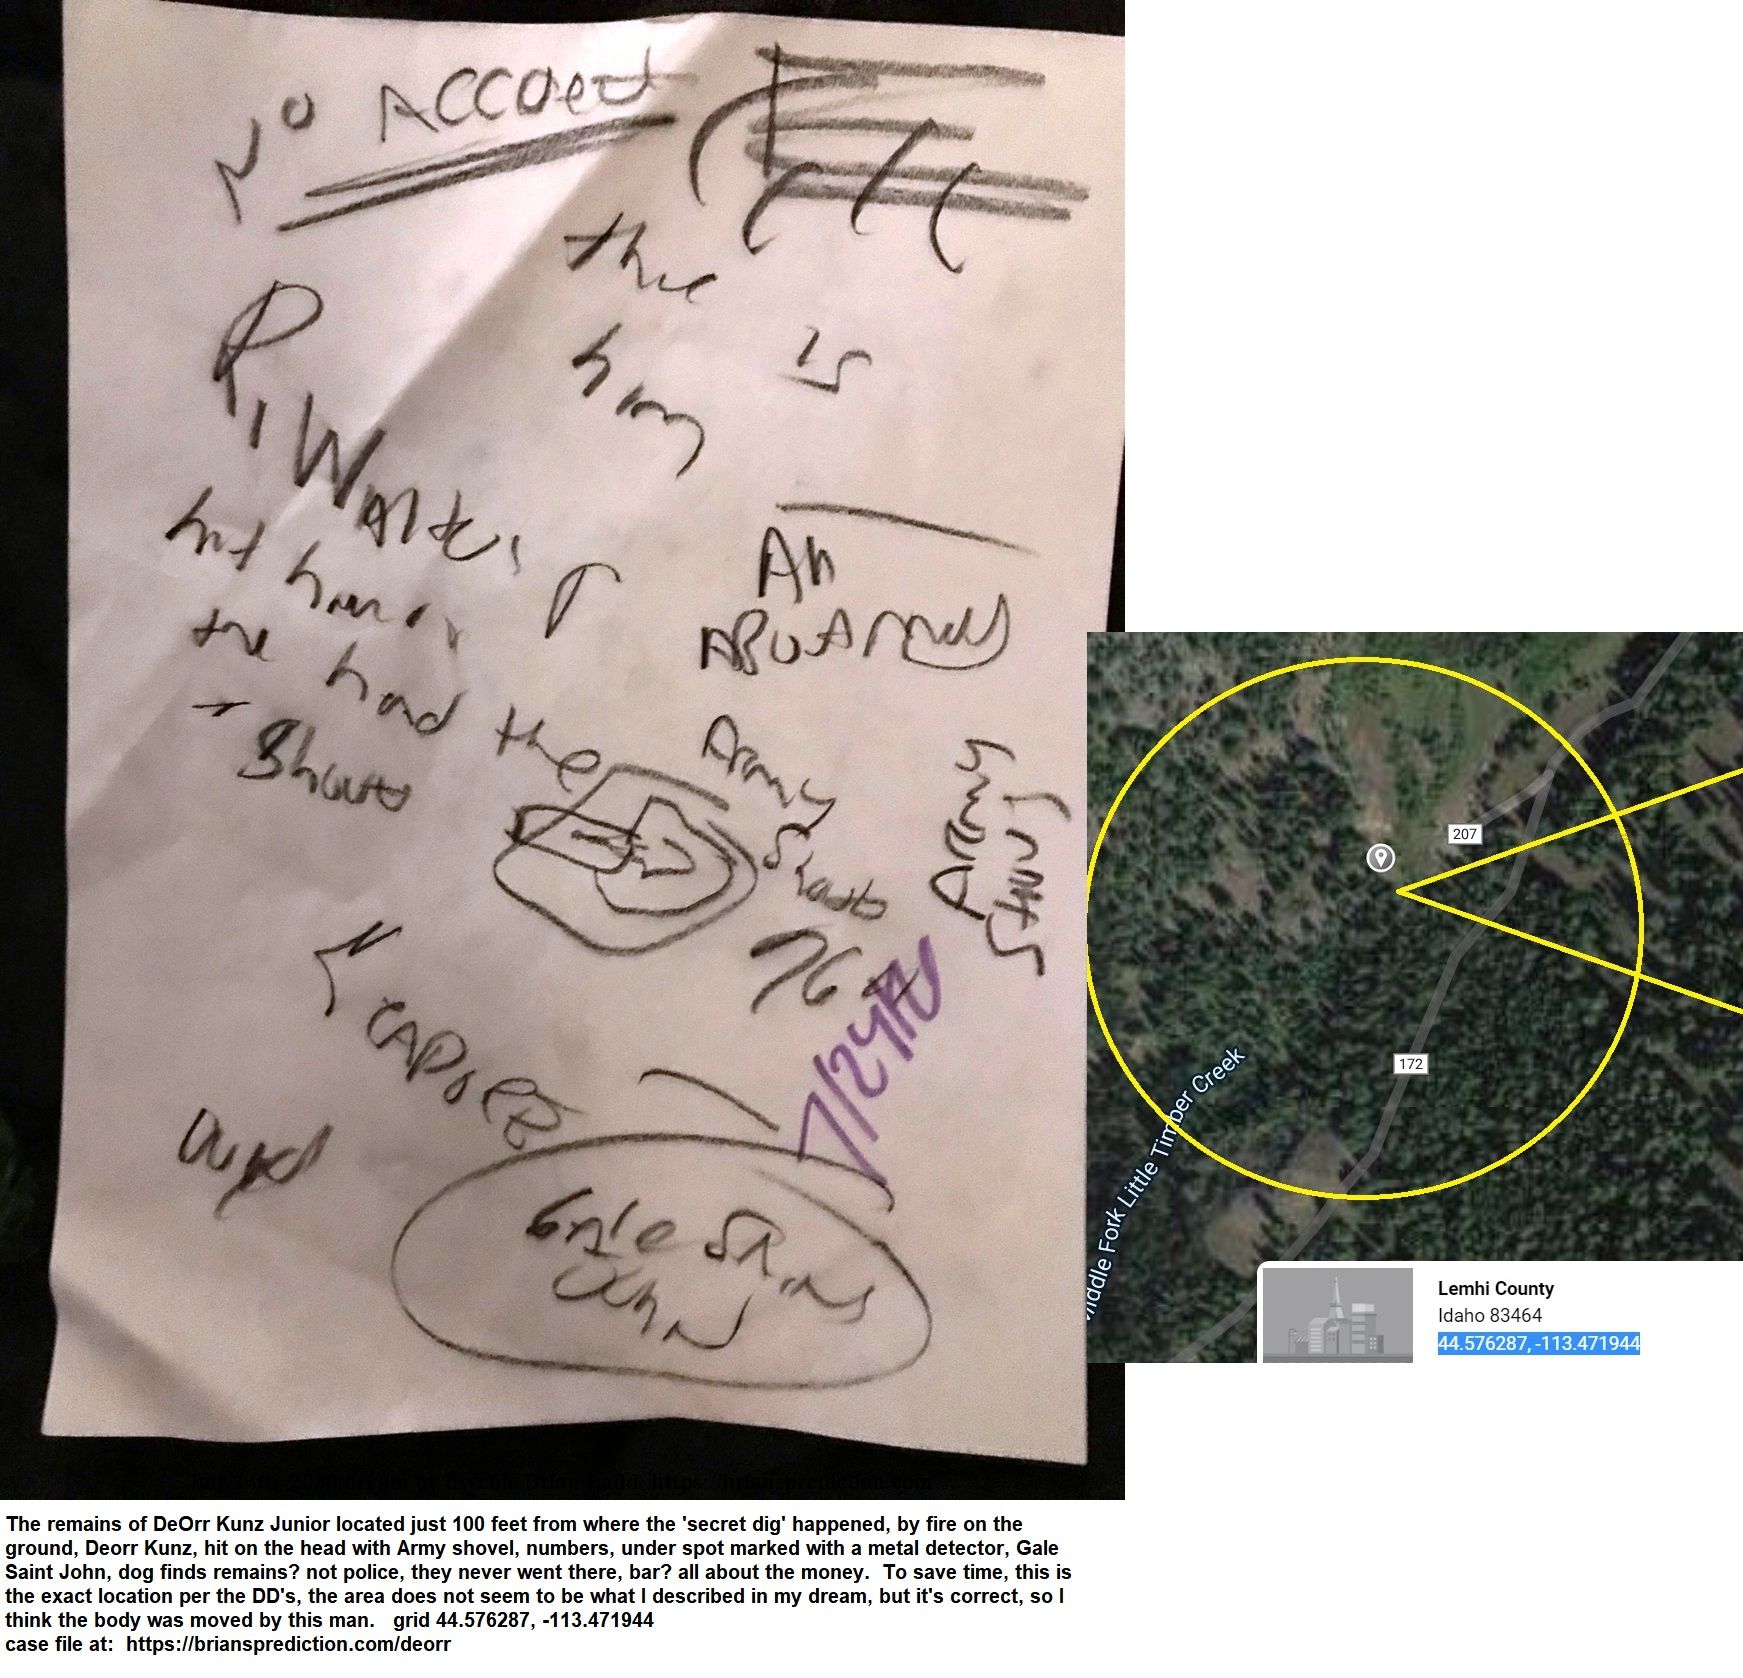 13370 24 July 2020 1 - From 3 Dream Drawing Dated July 24th, 2020  The Remains Of Deorr Kunz Junior Located Just 100 Fee...
From 3 Dream Drawing Dated July 24th, 2020  The Remains Of Deorr Kunz Junior Located Just 100 Feet From Where The 'secret Dig' Happened, By Fire On The Ground, Deorr Kunz, Hit On The Head With Army Shovel, Numbers, Under Spot Marked With A Metal Detector, Gale Saint John, Dog Finds Remains? Not Police, They Never Went There, Bar? All About The Money.  To Save Time, This Is The Exact Location Per The Dd'S, The Area Does Not Seem To Be What I Described In My Dream, But It'S Correct, So I Think The Body Was Moved By This Man.  Grid 44.576287, -113.471944  Case File At:   https://briansprediction.com/Deorr
